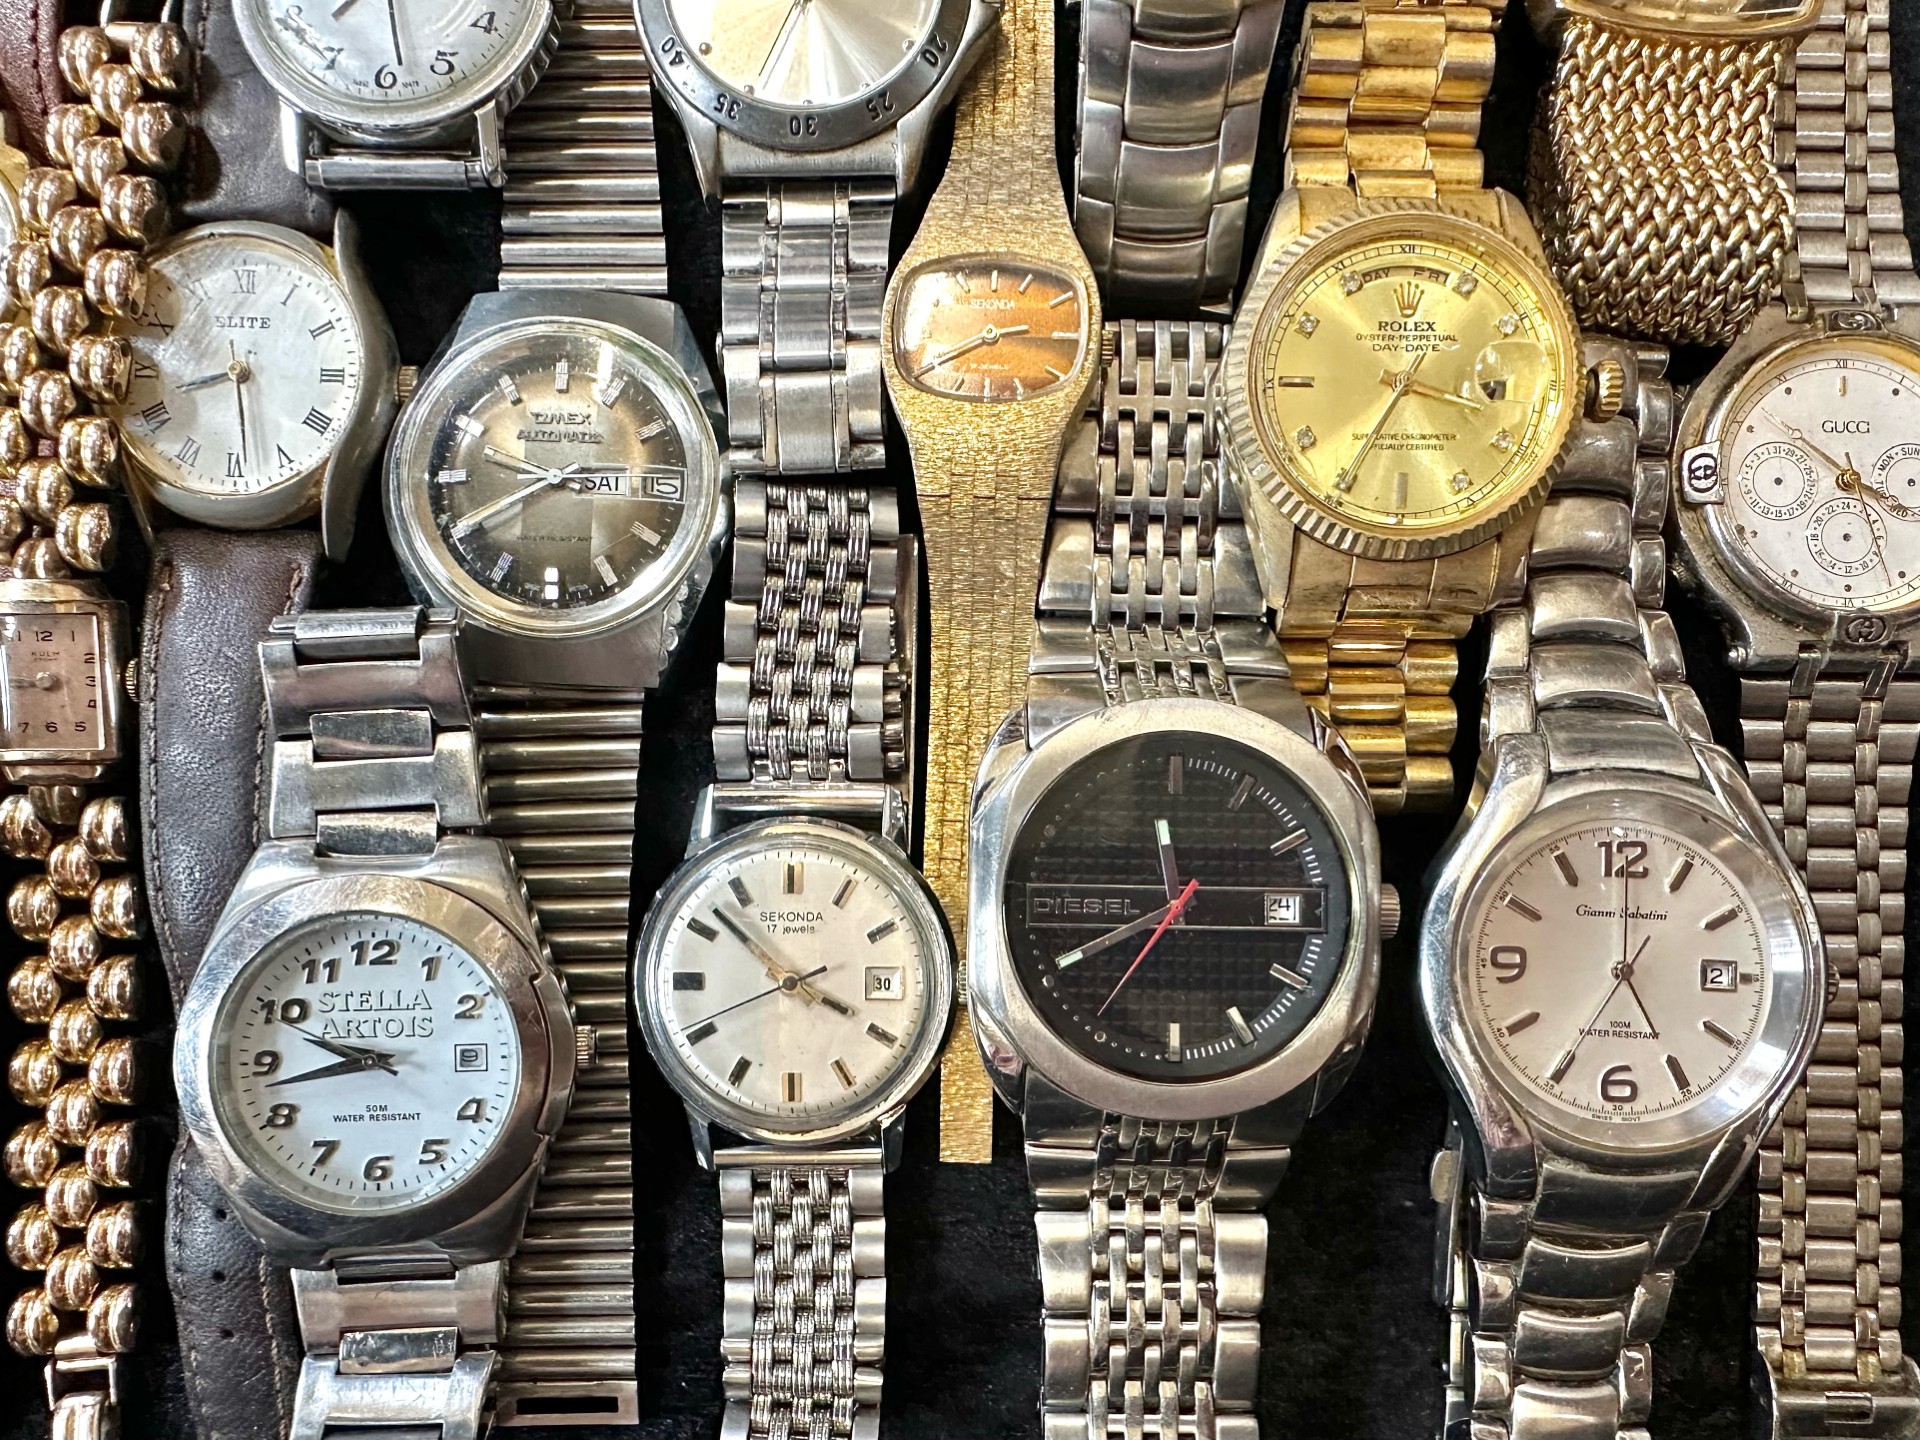 Collection of Ladies & Gentleman's Wristwatches, leather and bracelet straps, makes include Sekonda, - Image 3 of 4